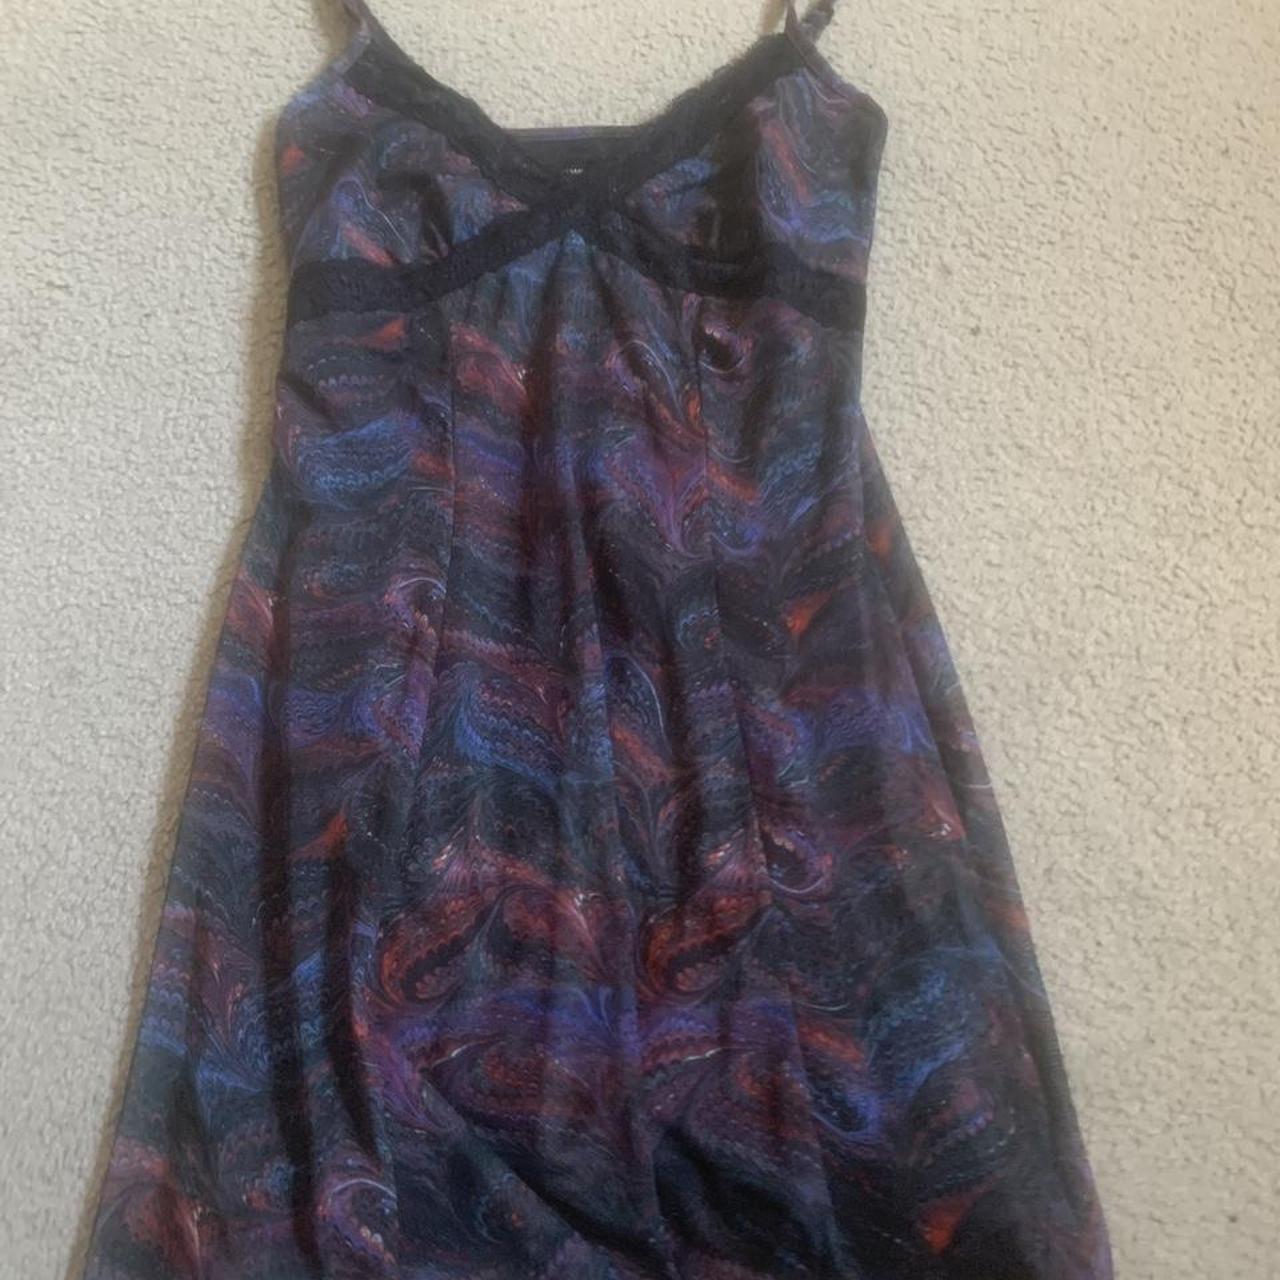 Never worn dress from urban outfitters. Size:... - Depop